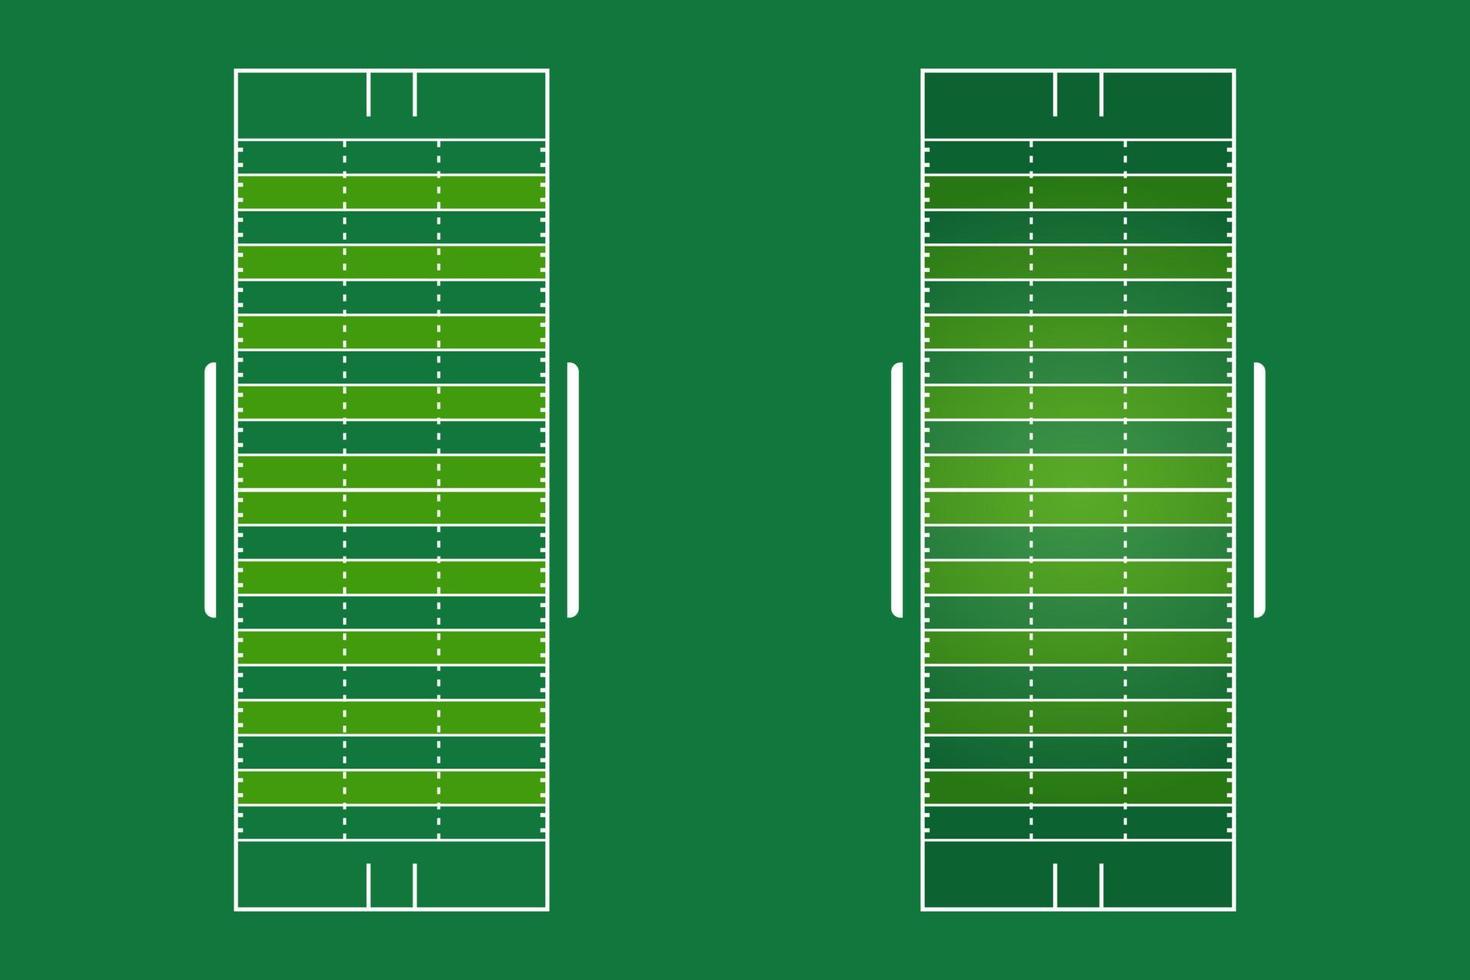 American football court flat design, football field graphic illustration, Vector of American football court and layout.